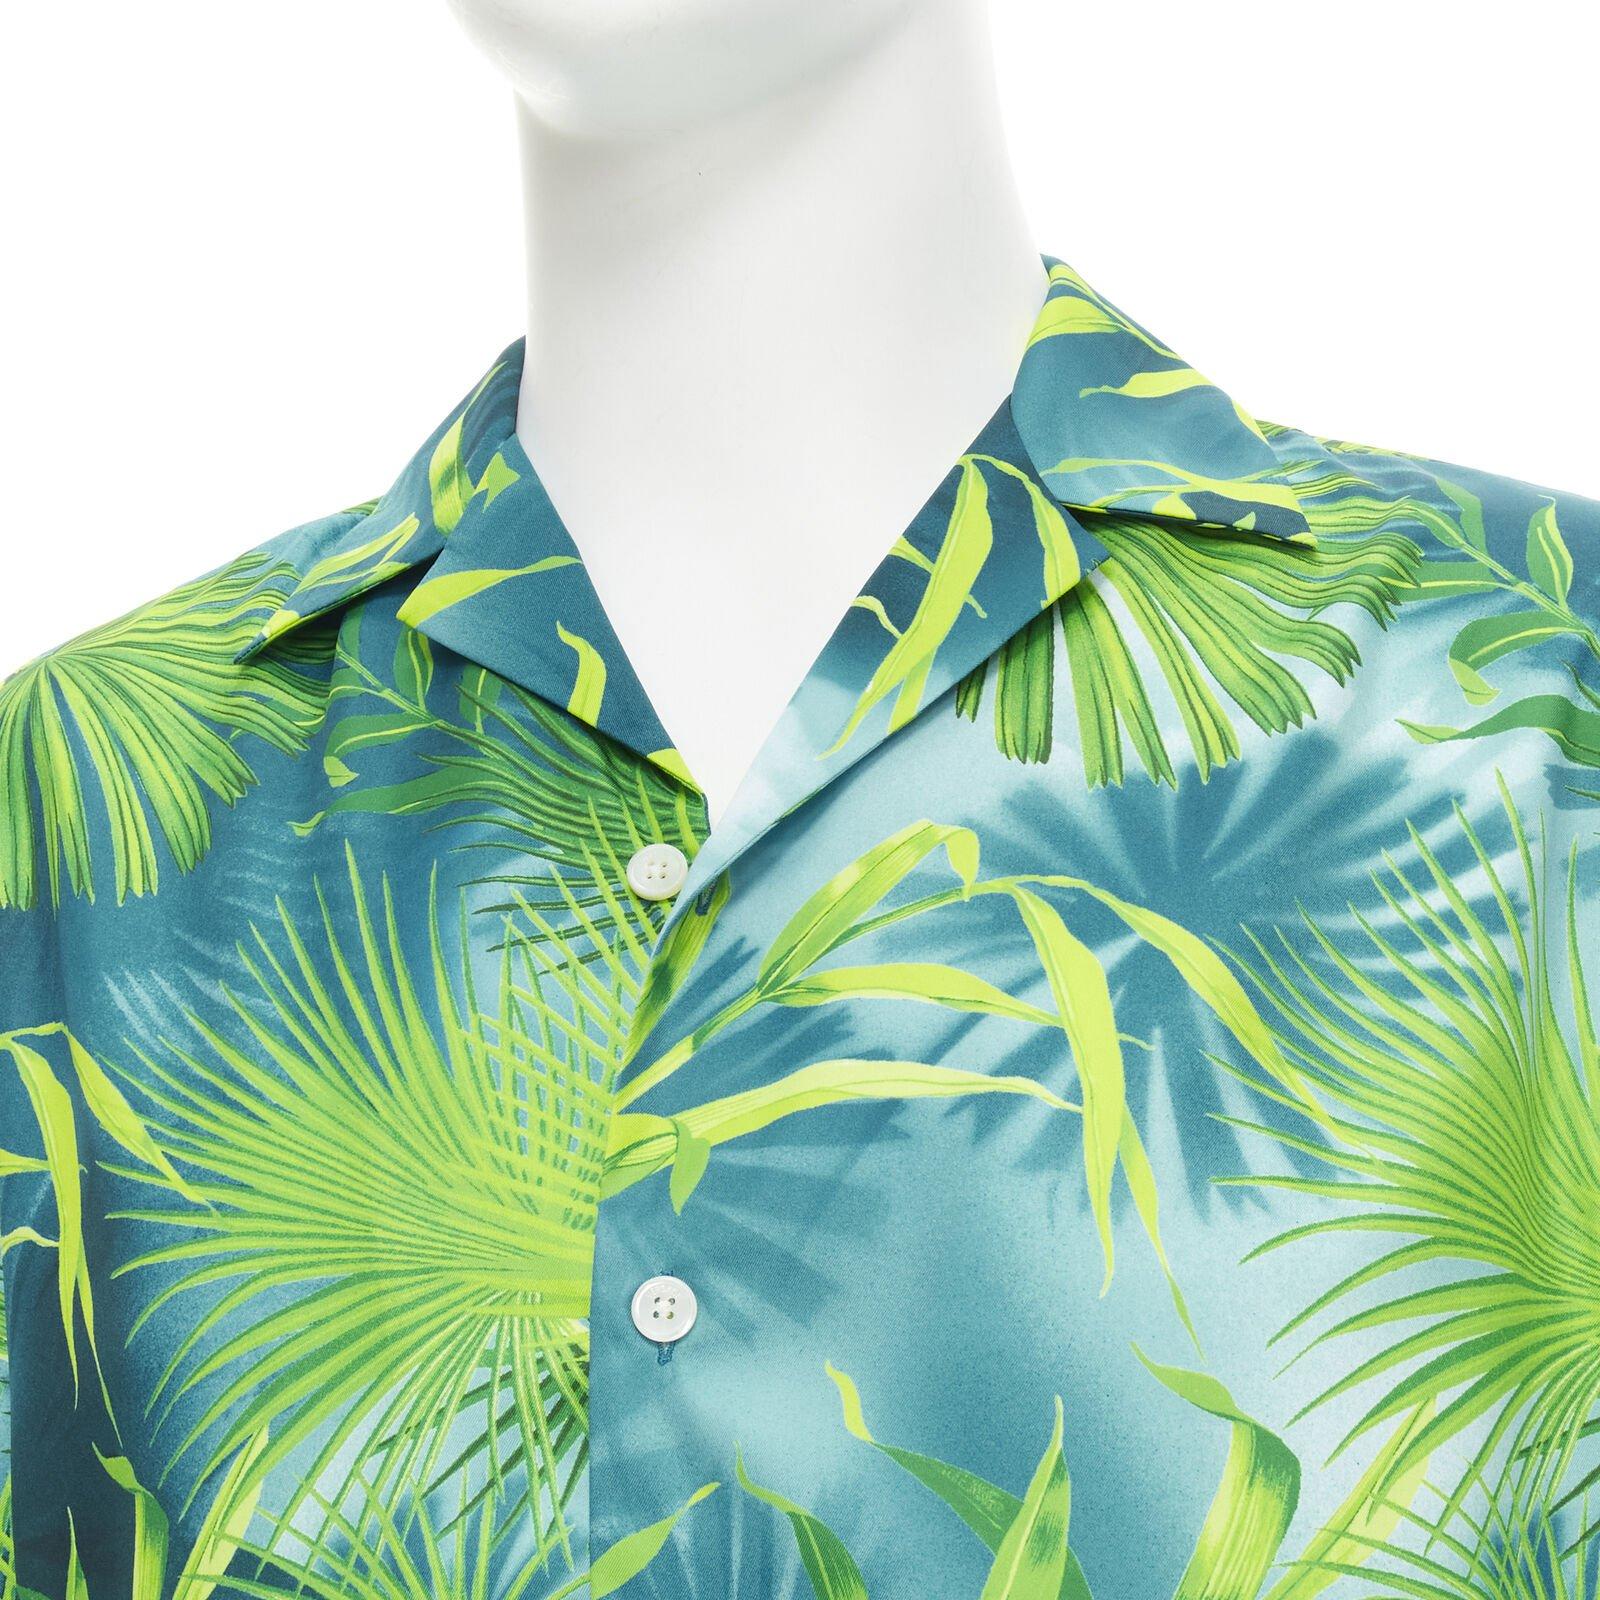 VERSACE 2020 Iconic JLo Jungle print green tropical print shirt EU41 XL
Reference: TGAS/C01007
Brand: Versace
Designer: Donatella Versace
Model: Jungle shirt
Collection: Spring Summer 2020 Jungle Collection
As seen on: Fedez, Robbie